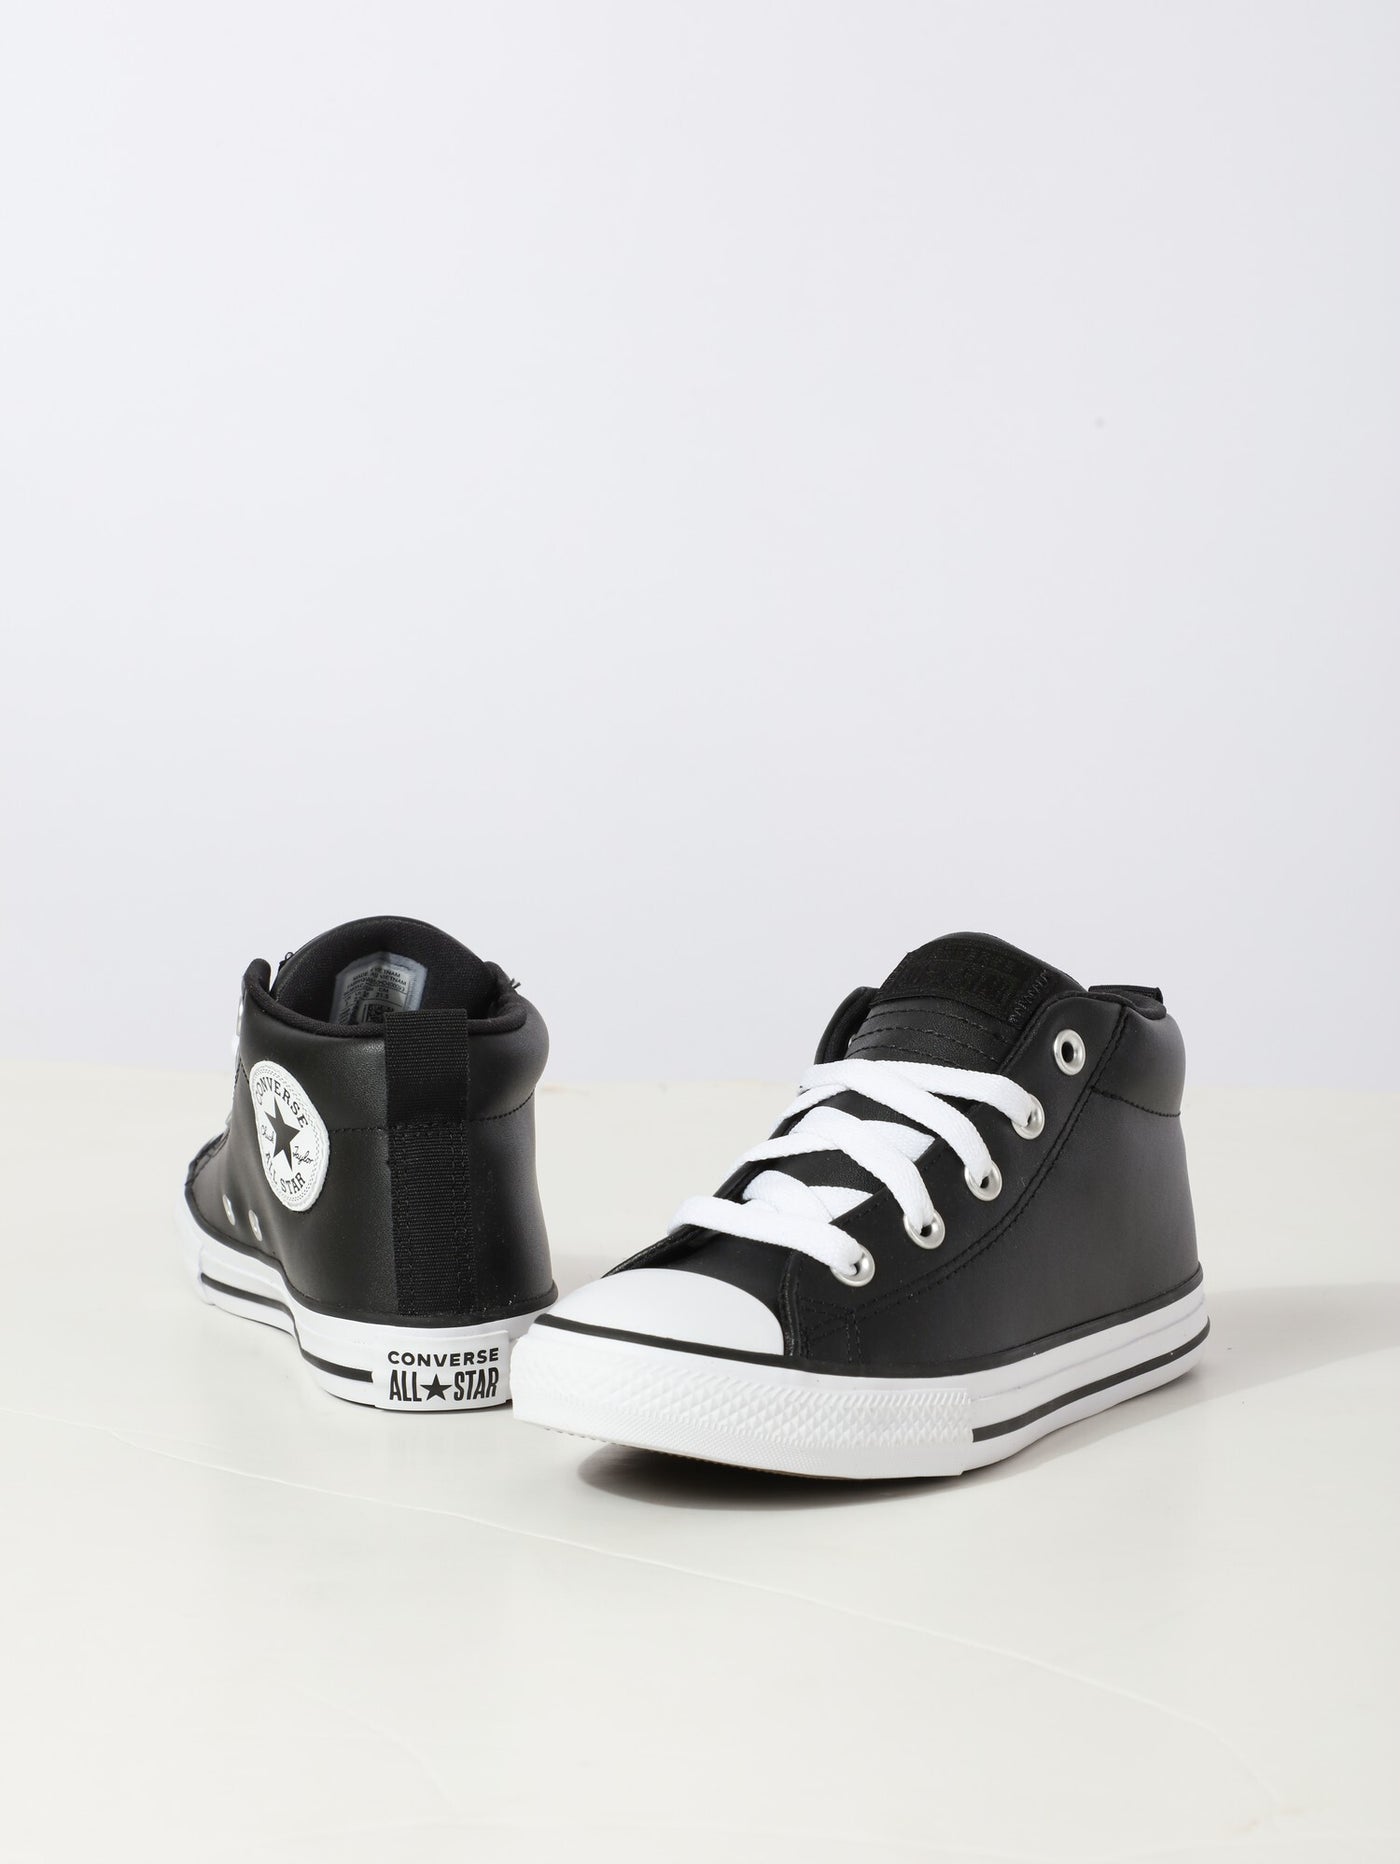 Converse Youth Unisex Chuck Taylor All Star Street Leather Sneakers